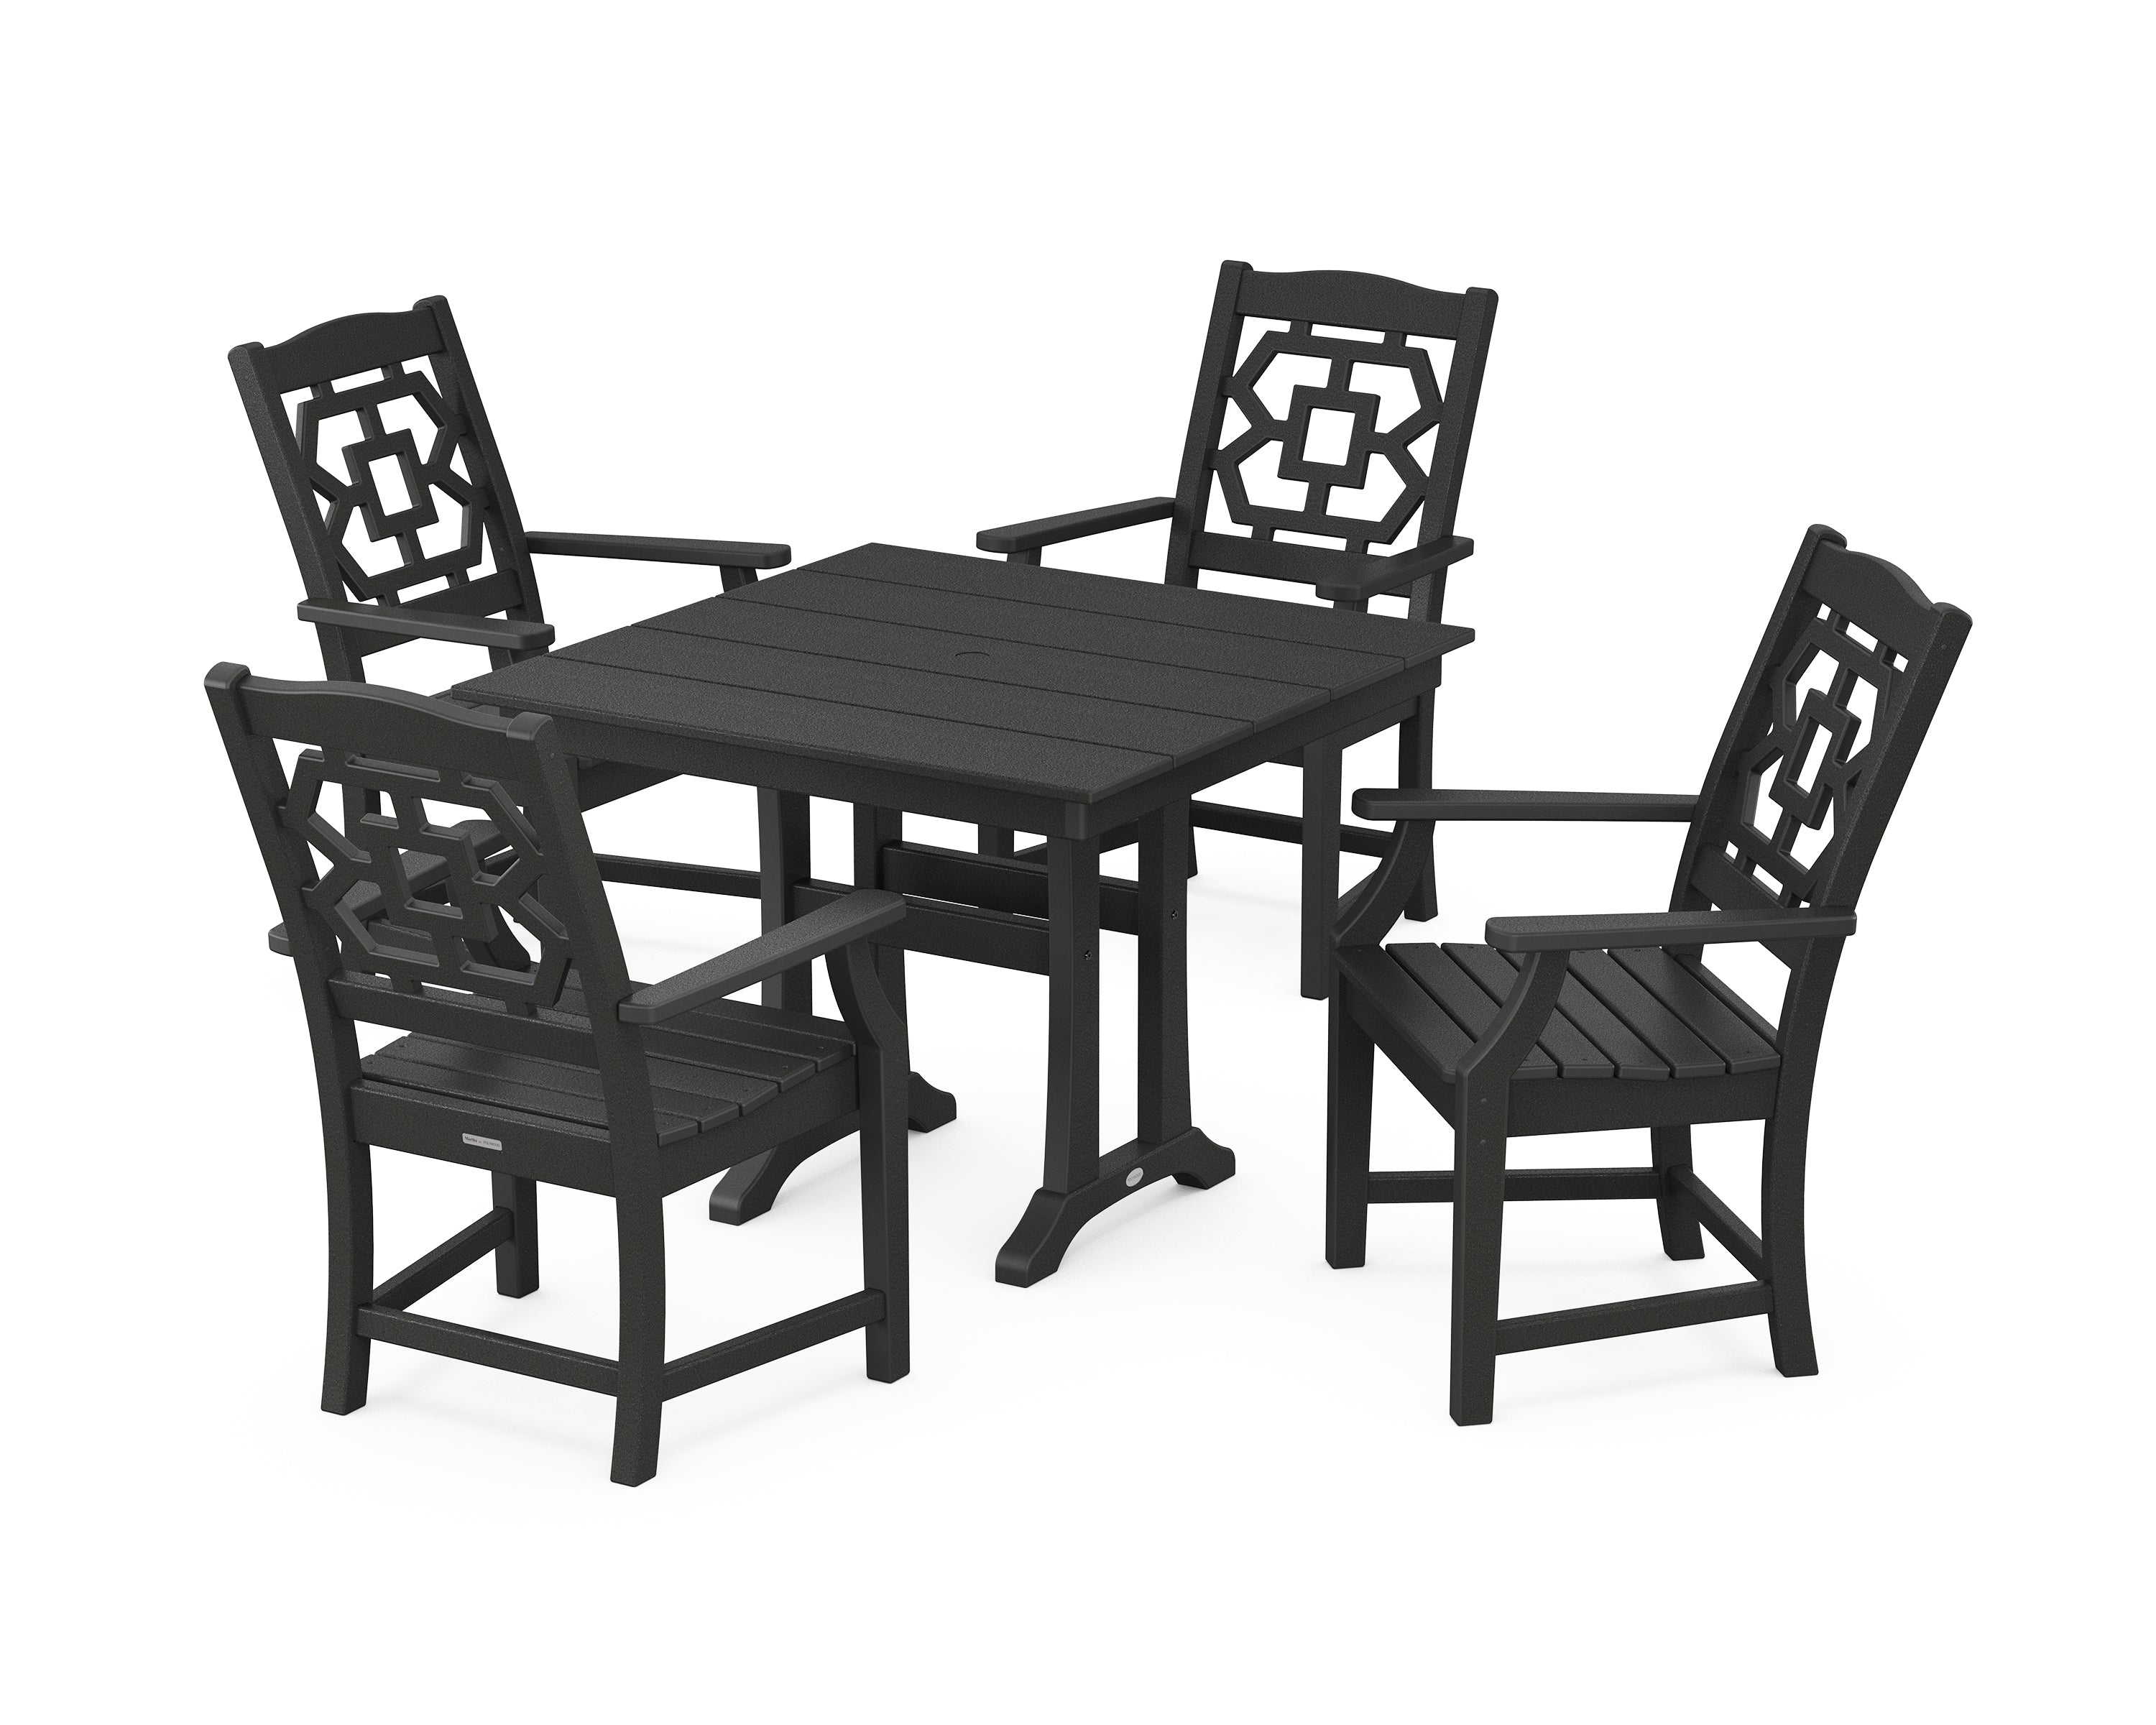 Martha Stewart by POLYWOOD® Chinoiserie 5-Piece Farmhouse Dining Set with Trestle Legs in Black